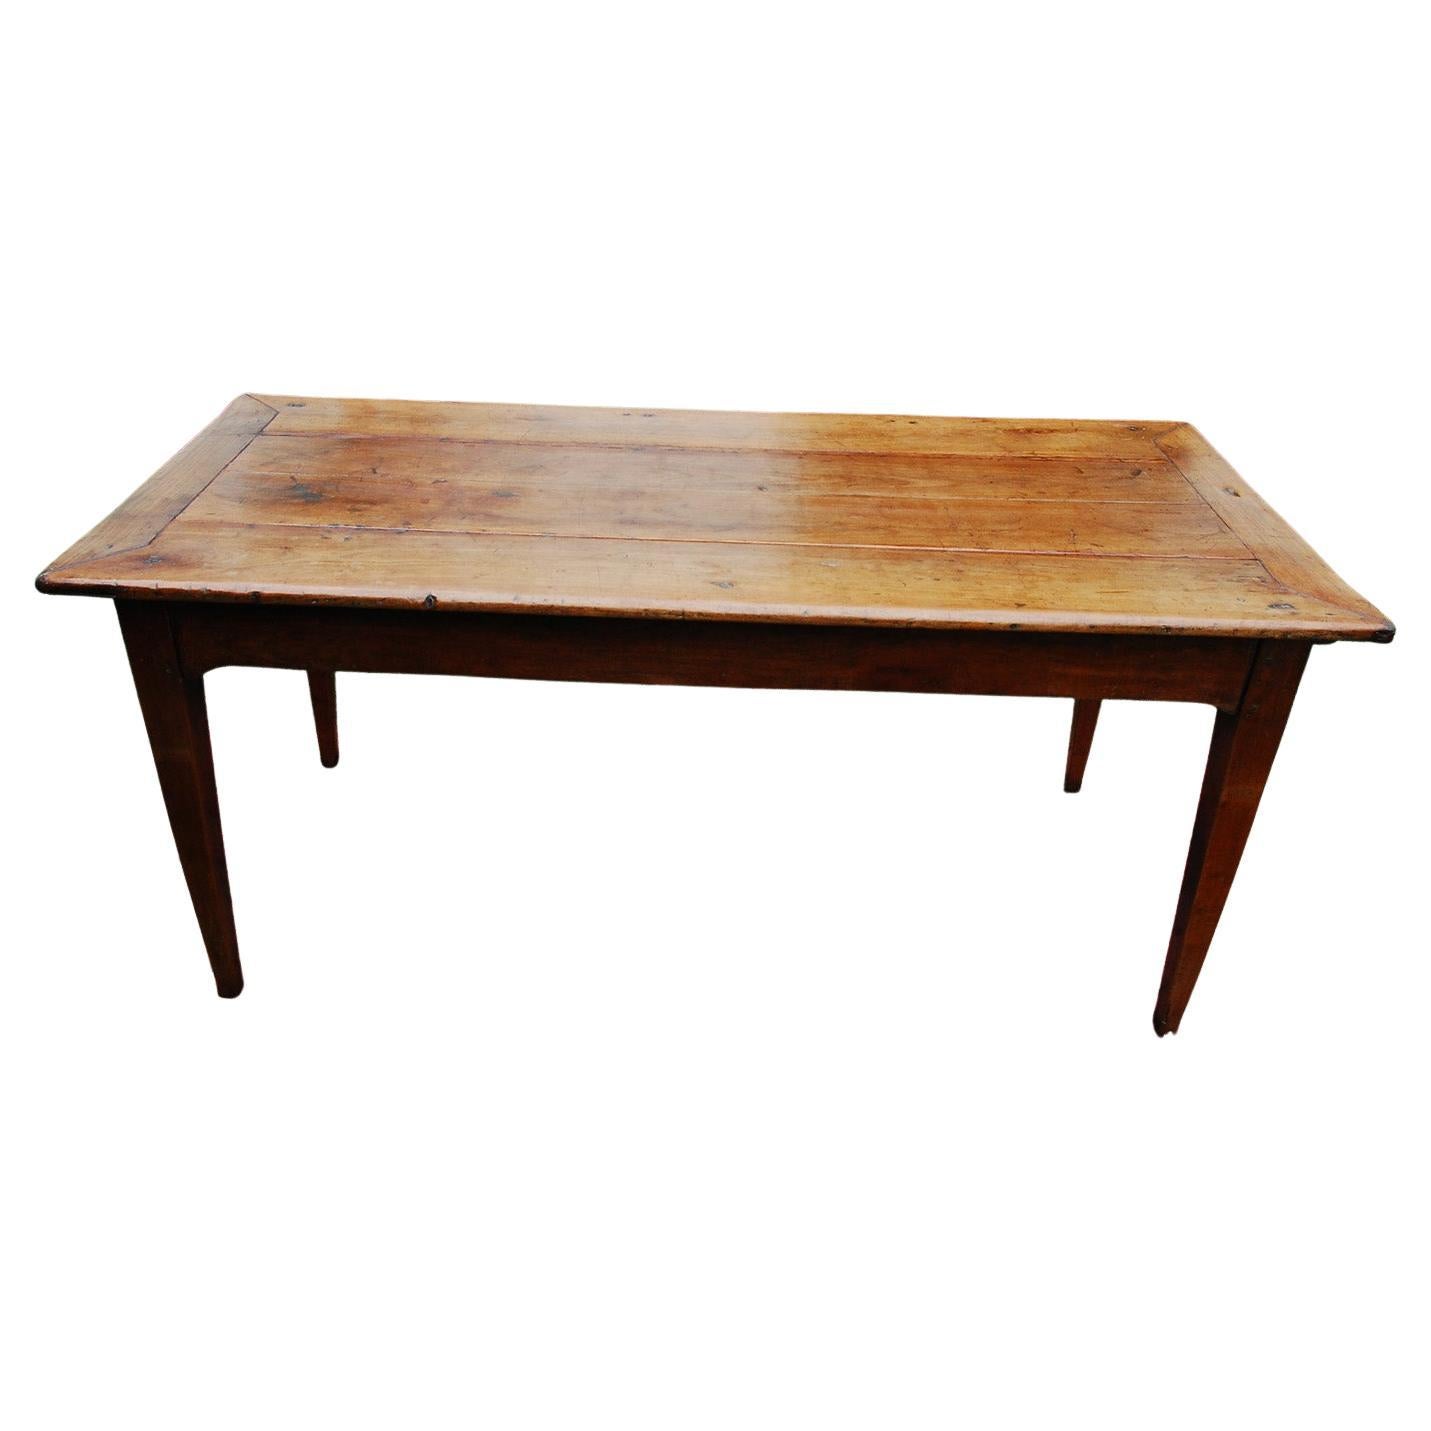 French Mid 19th Century Provincial Cherry Farmhouse Table with  Breadslide